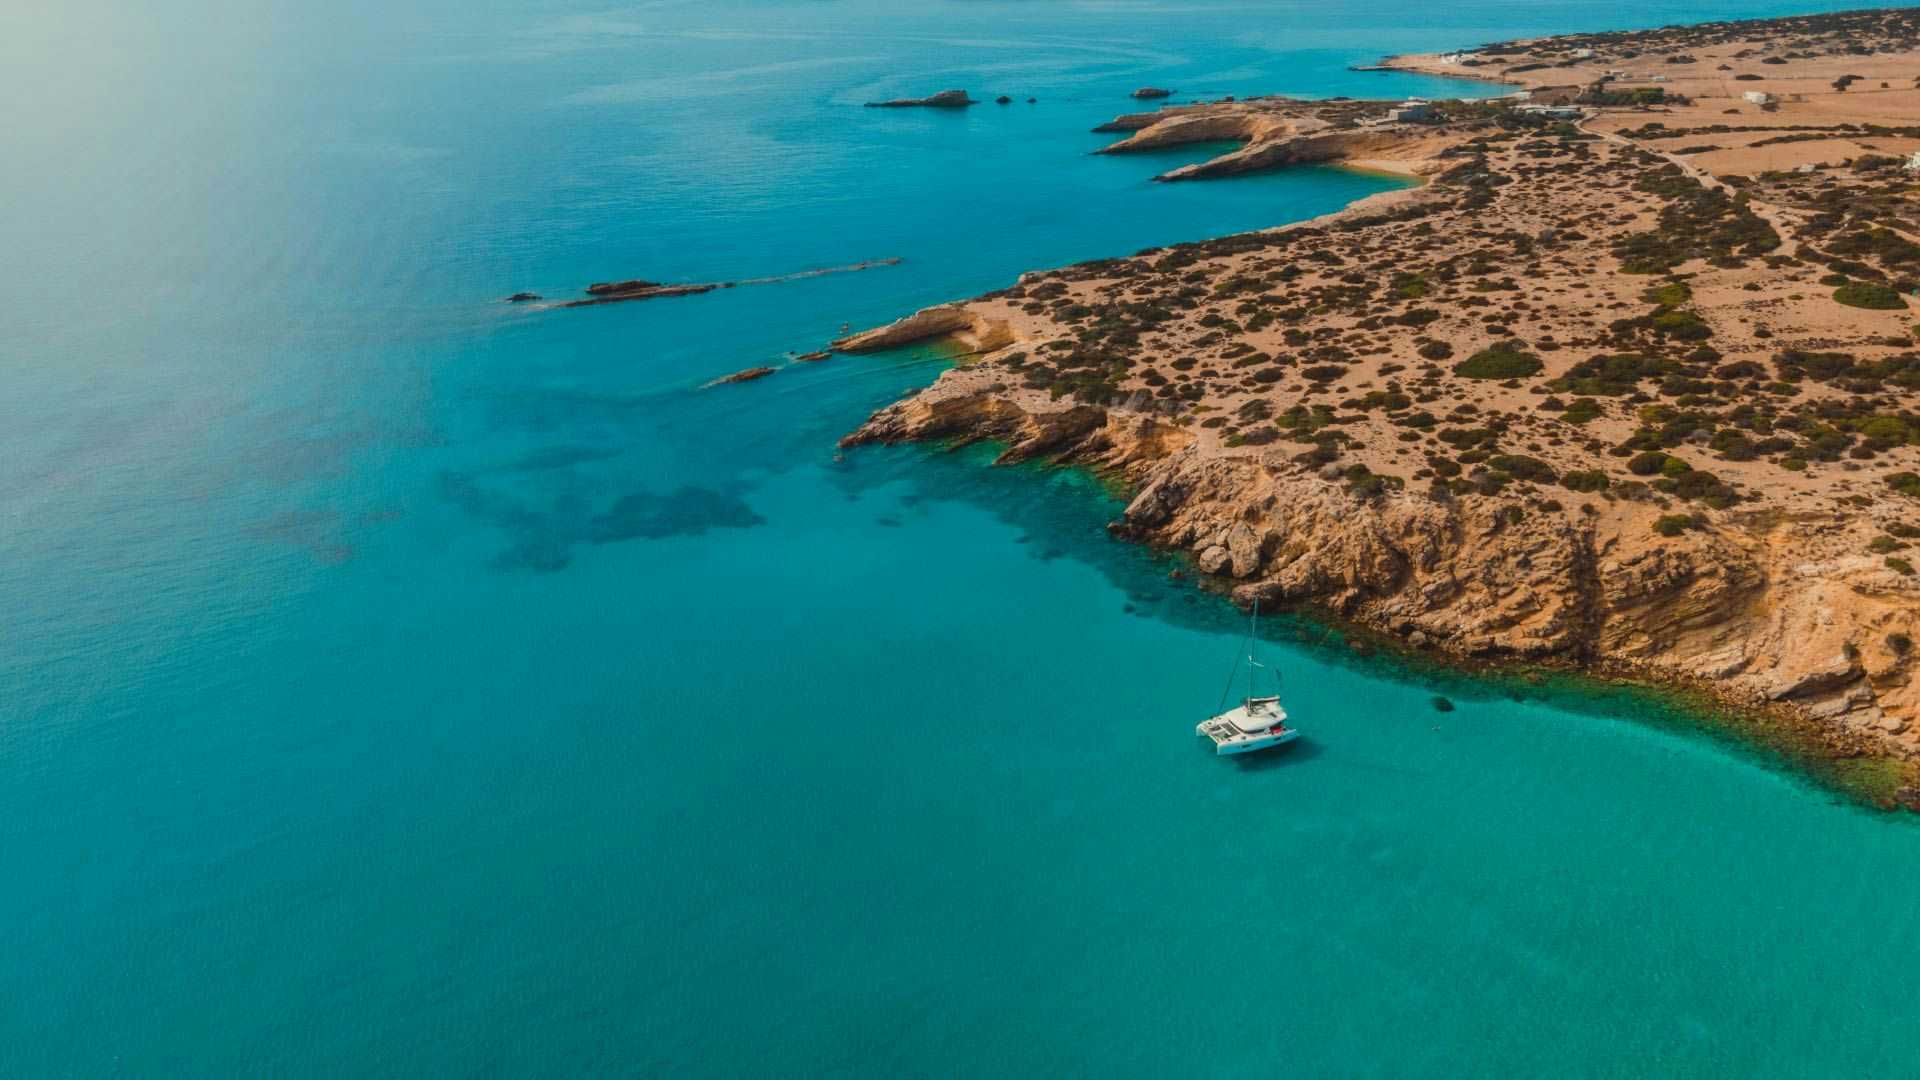 Yacht anchored in the Cyclades Islands in Greece